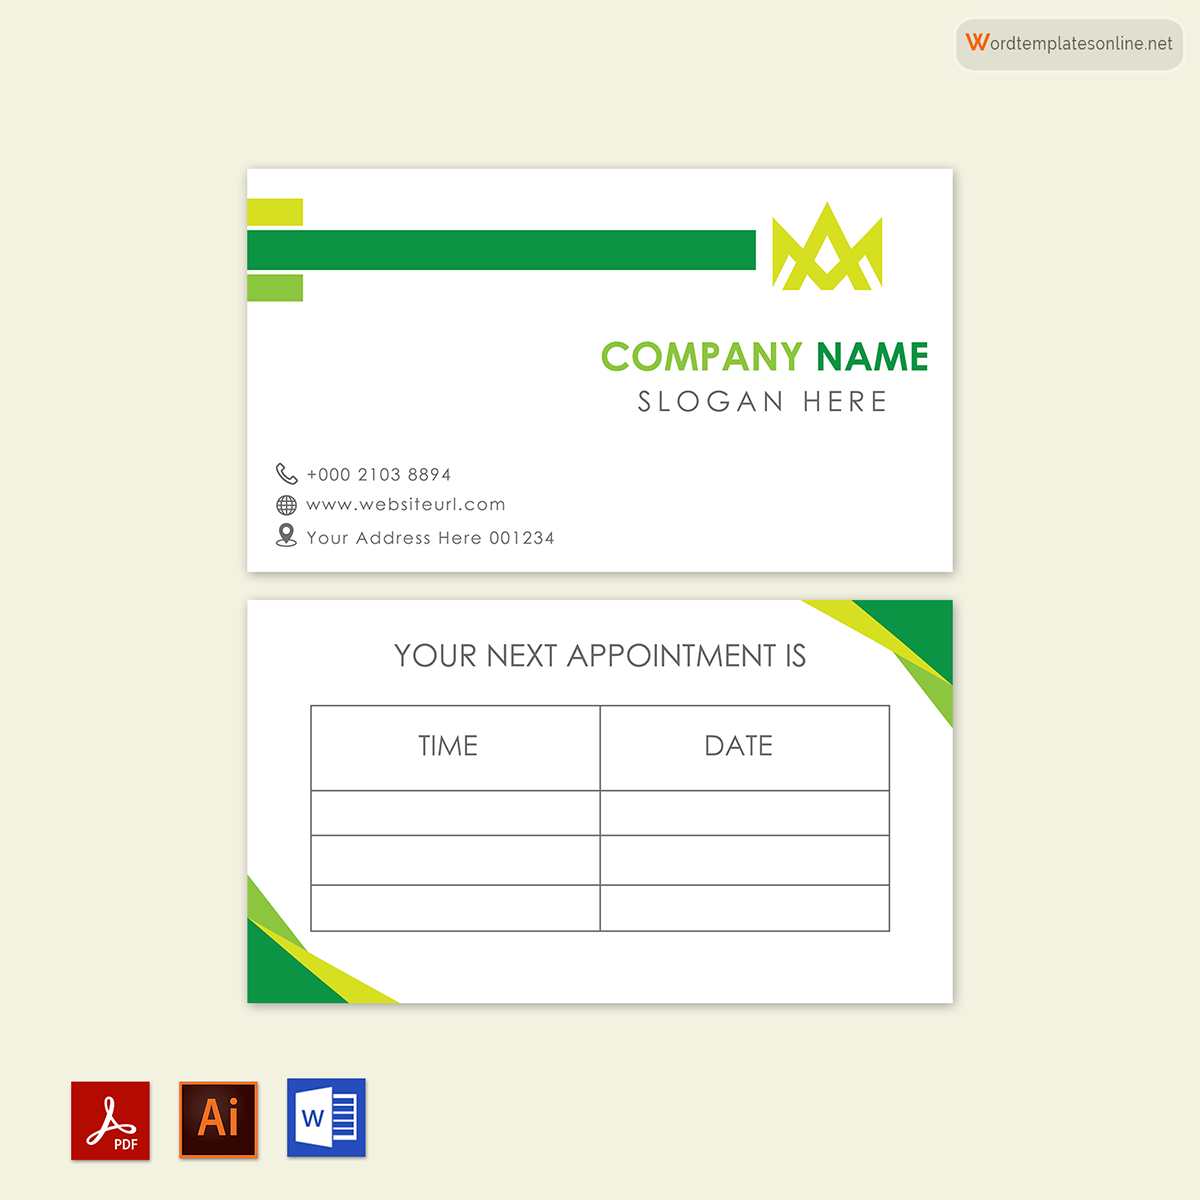 Appointment Card Template - Word and Illustrator Formats